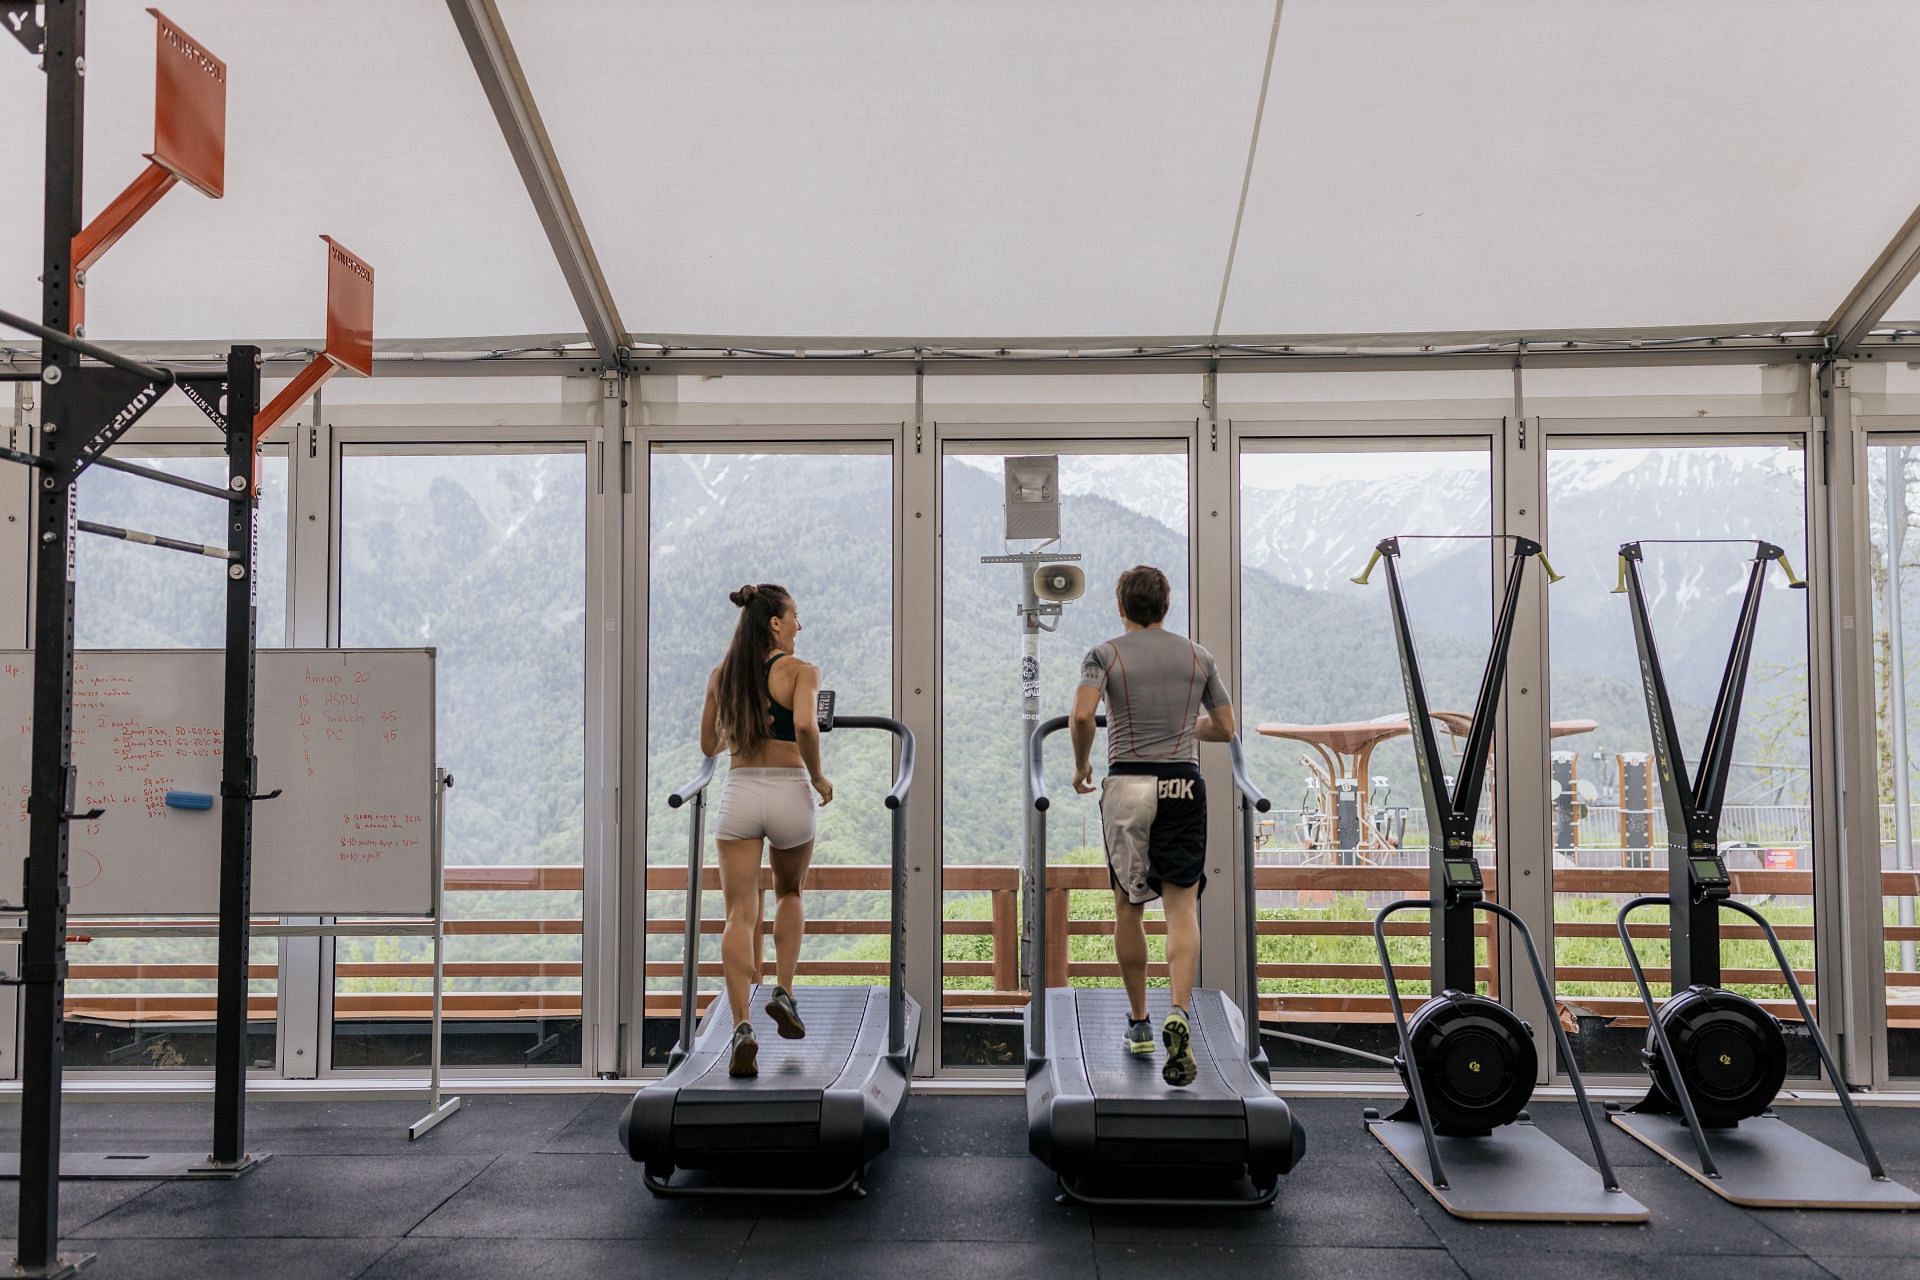 High intensity treadmill workout can help you to loose weight faster. (Image via Pexels / Anastasia Shuraeva)